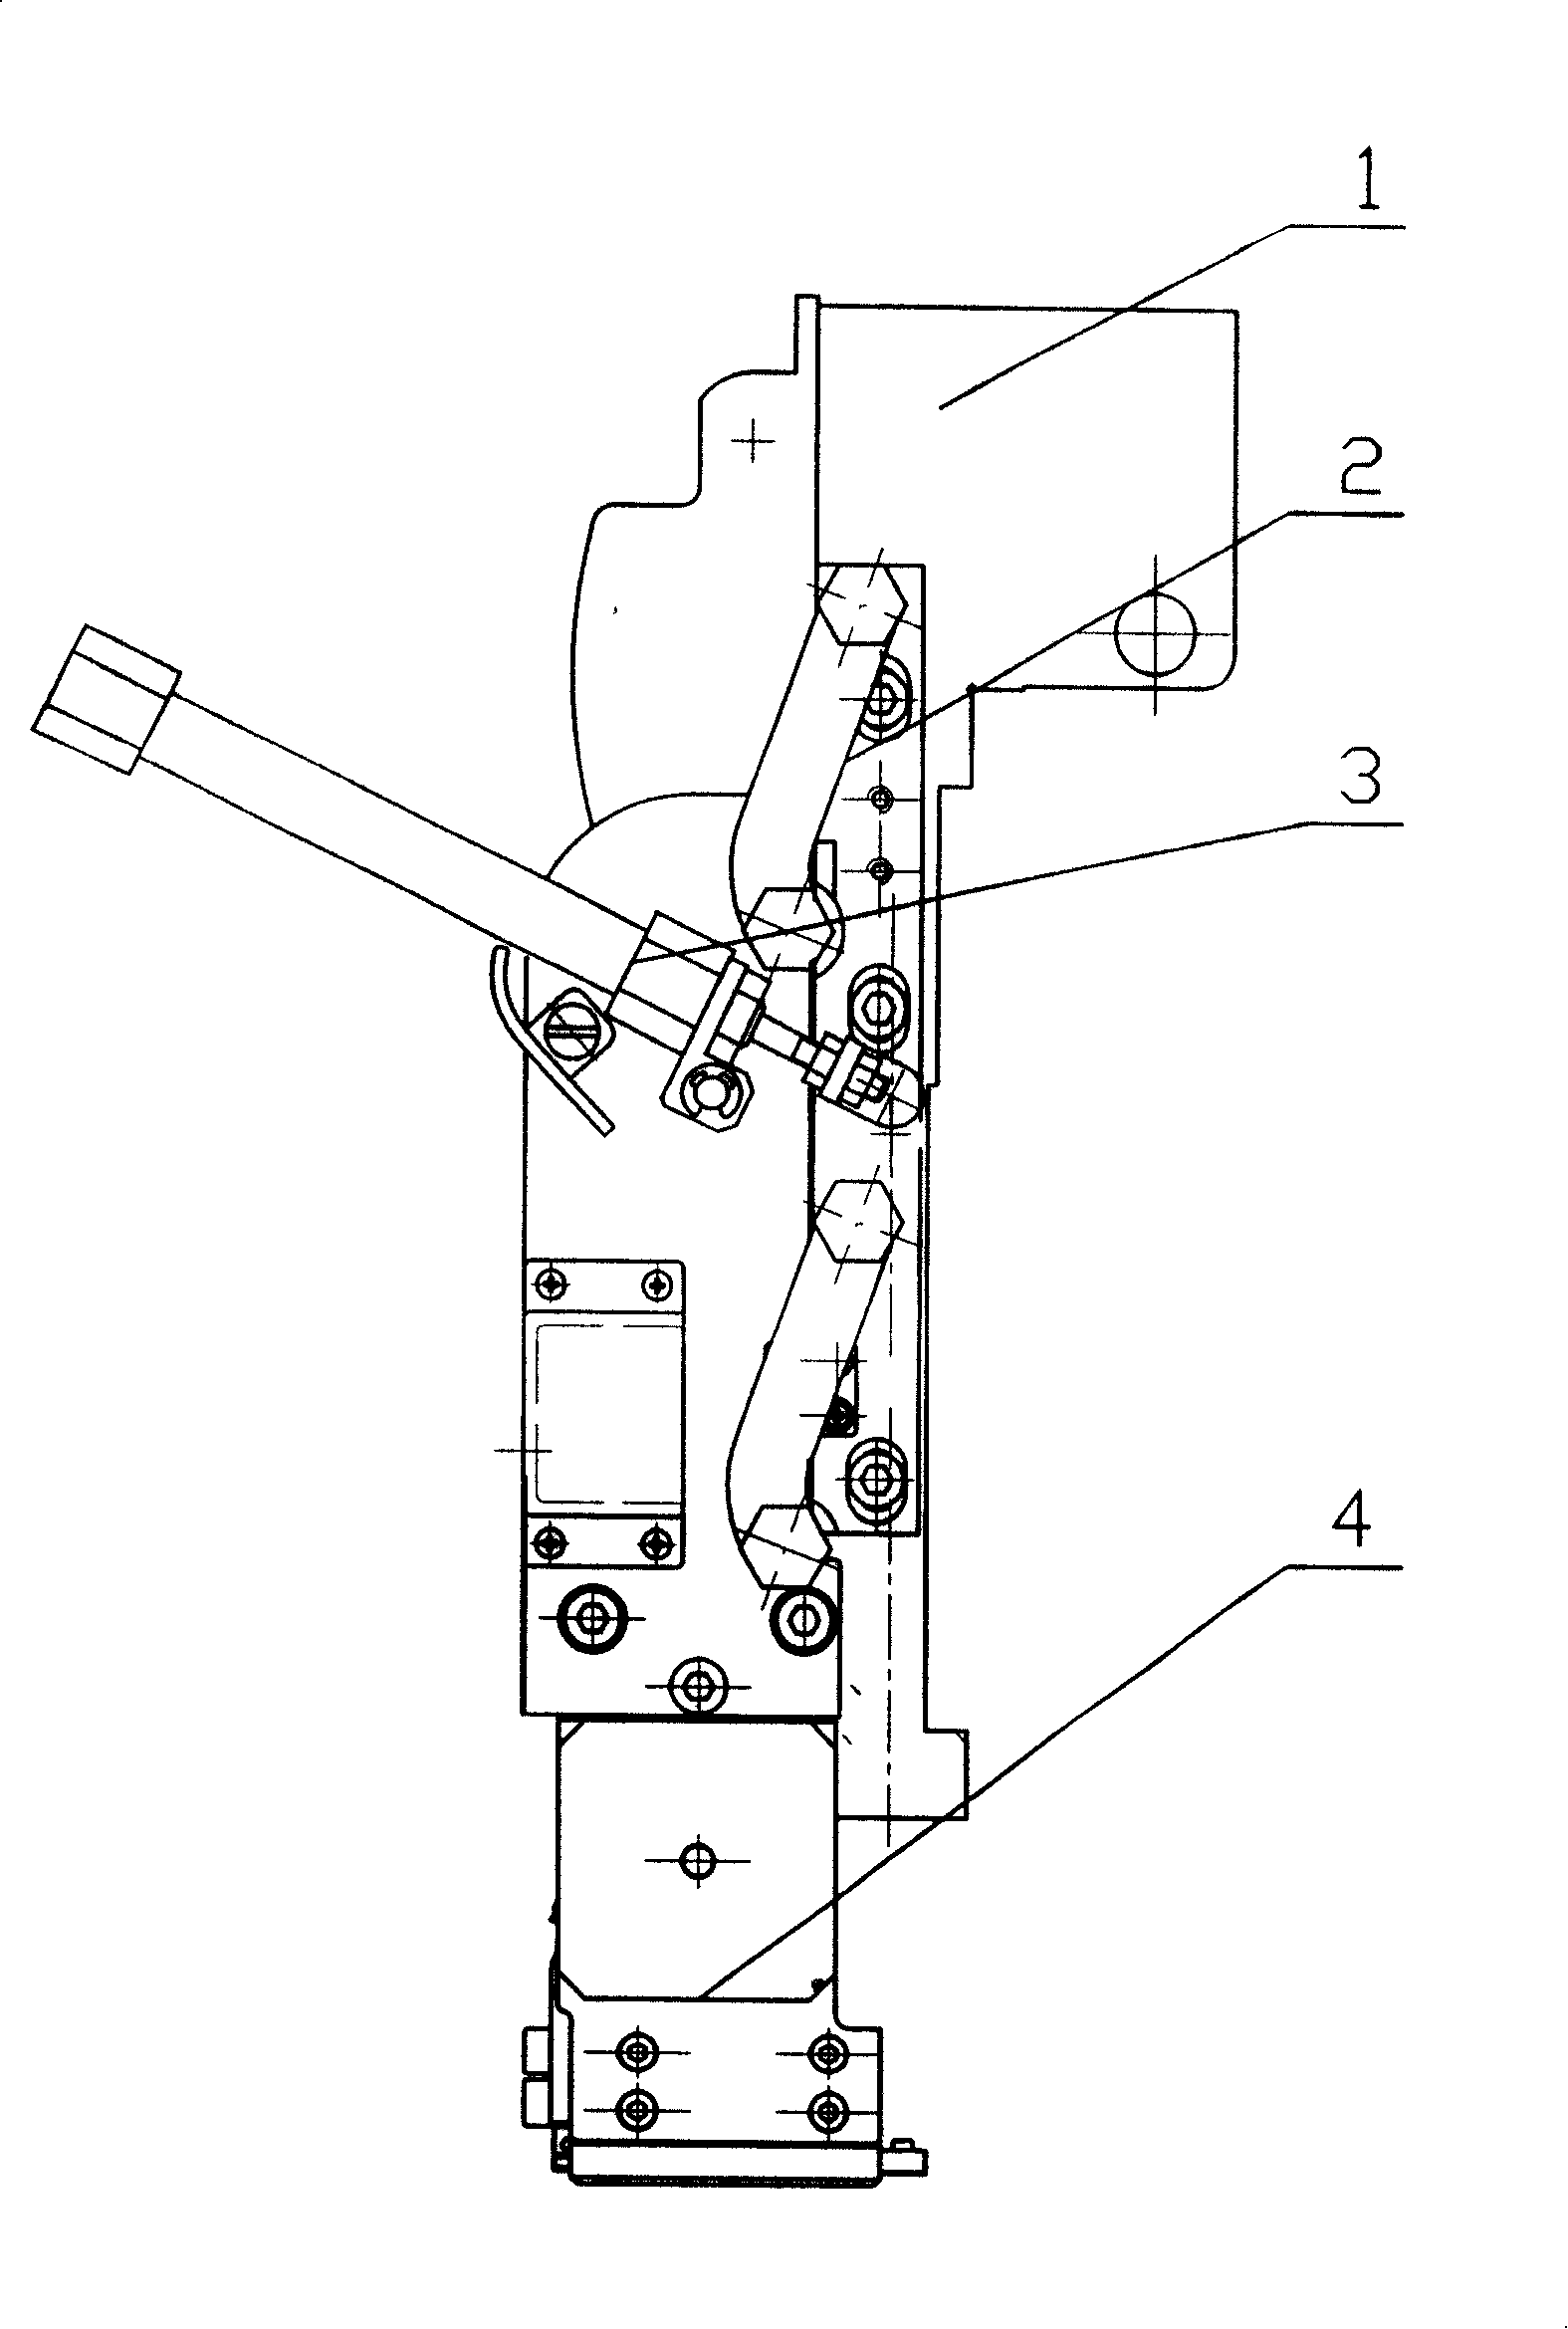 Bead embroidering mechanism for computer embroidering machine